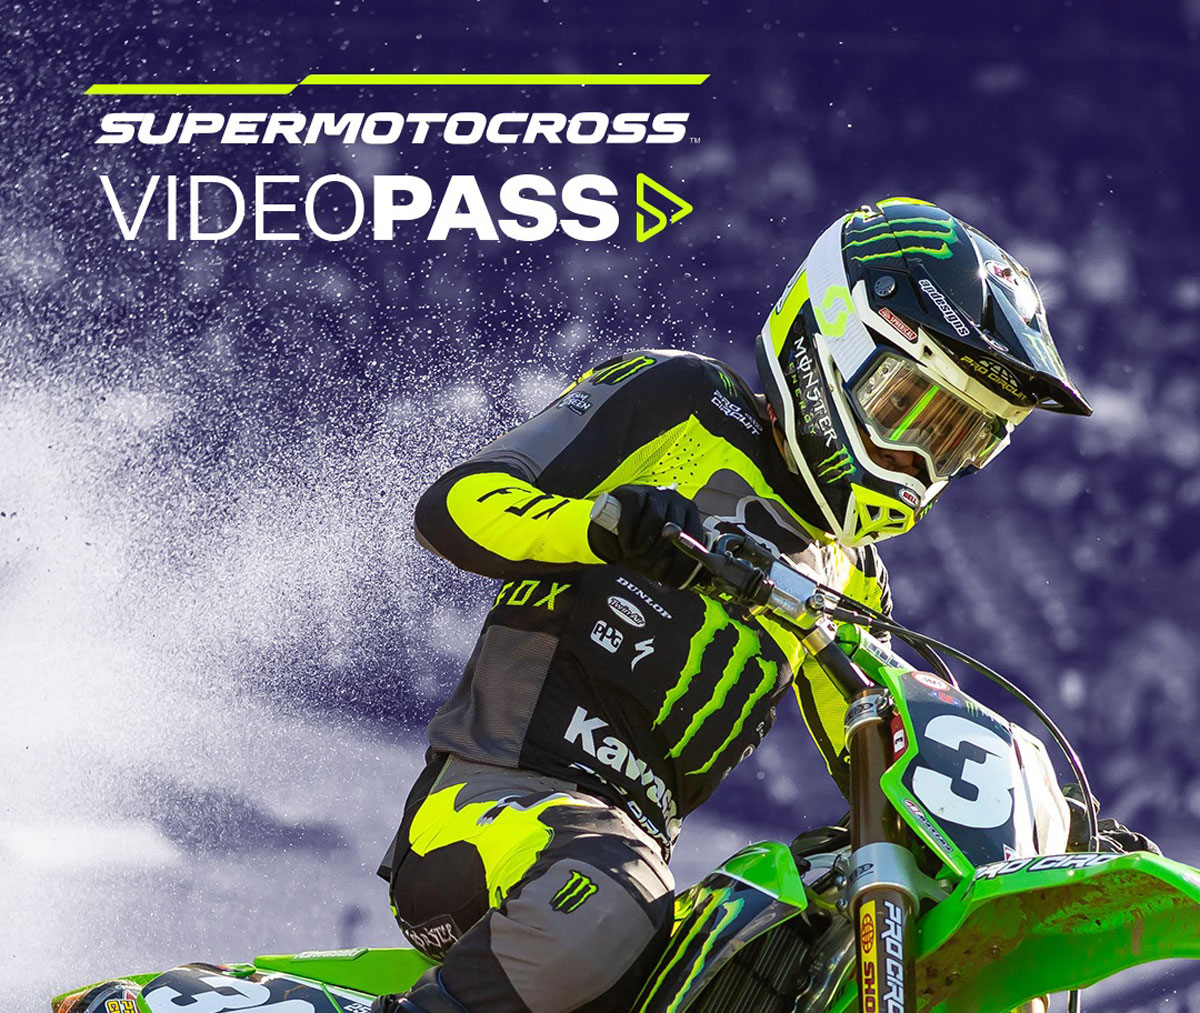 Live and on-demand access to all 31 rounds of the SuperMotocross Season MCNews